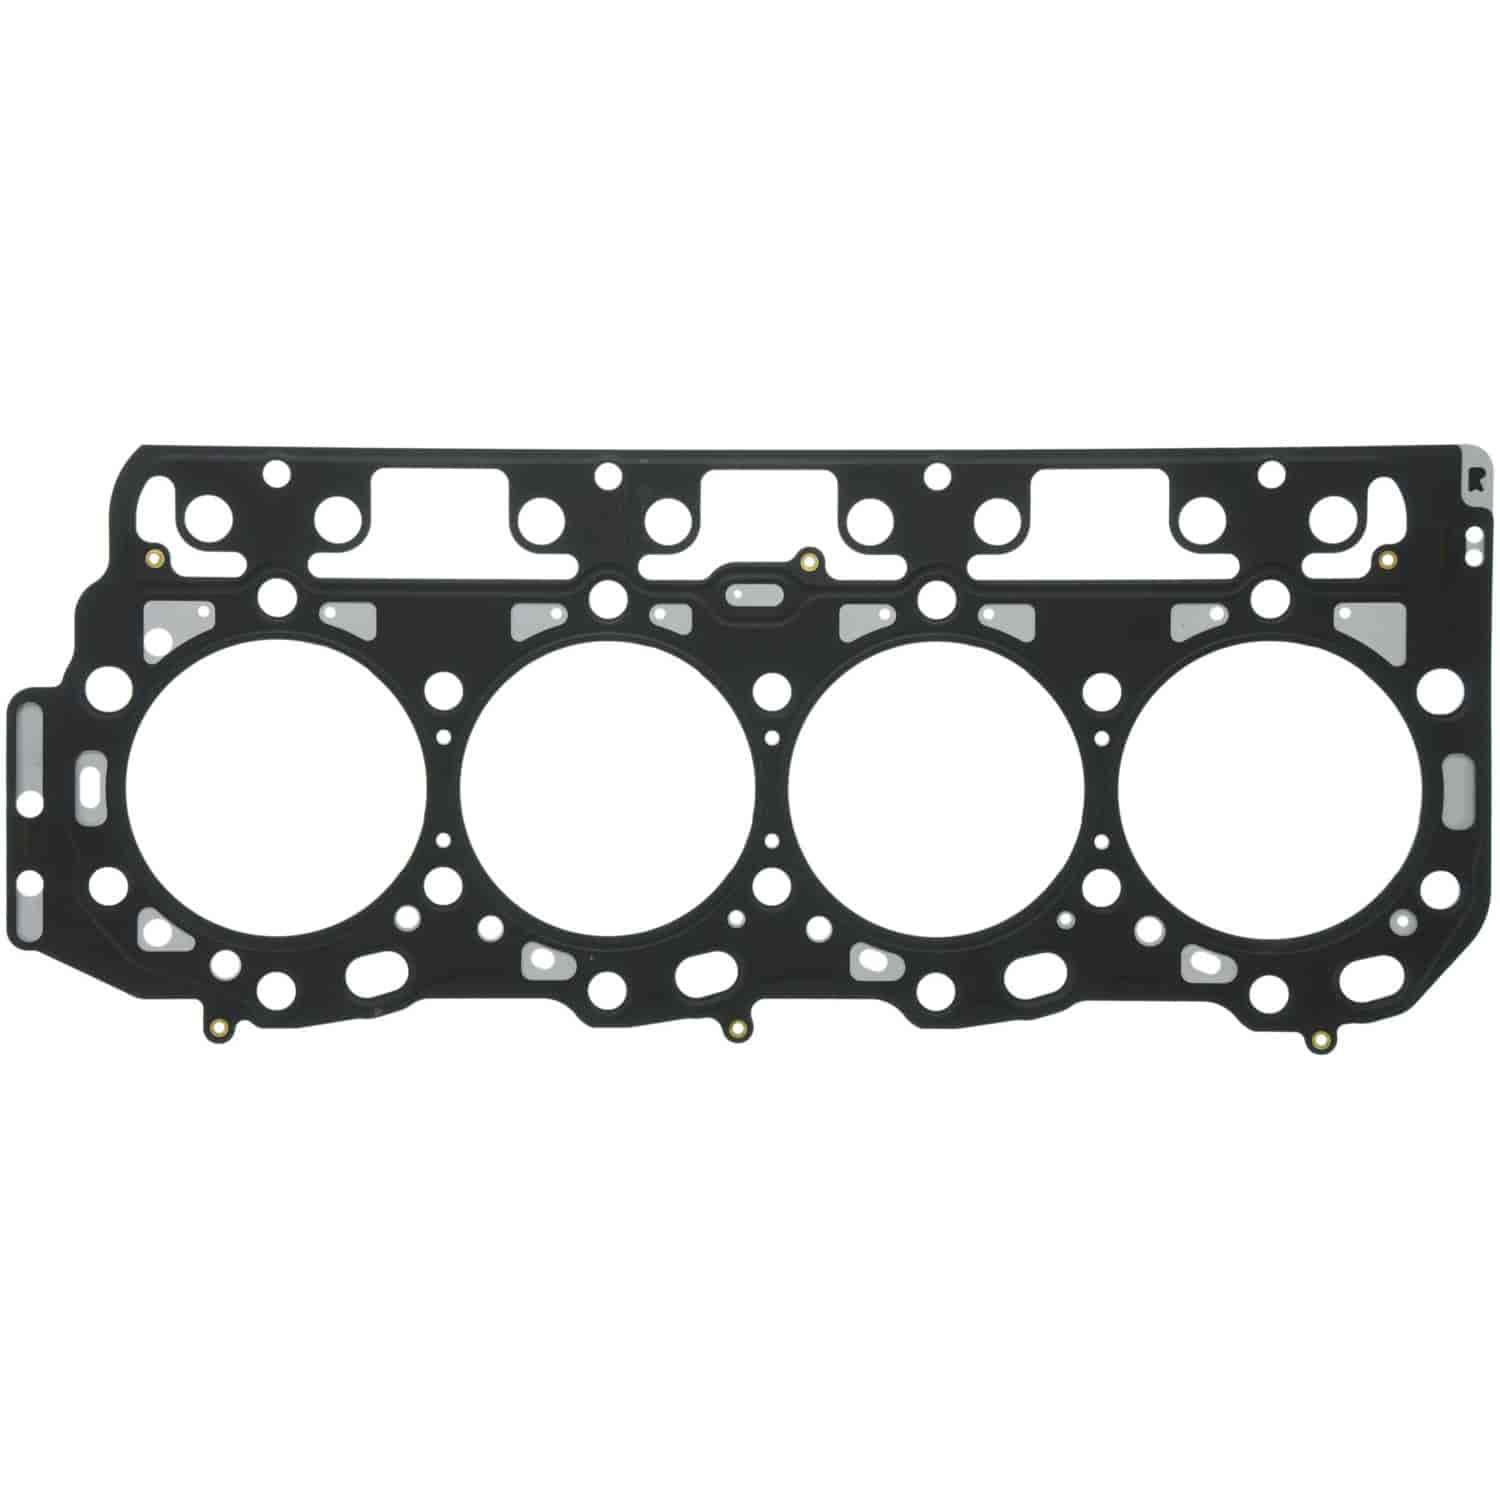 Cylinder Head Gasket Chevy Duramax Diesel V8 6.6L (Right Side) 1.05mm Thick Grade C